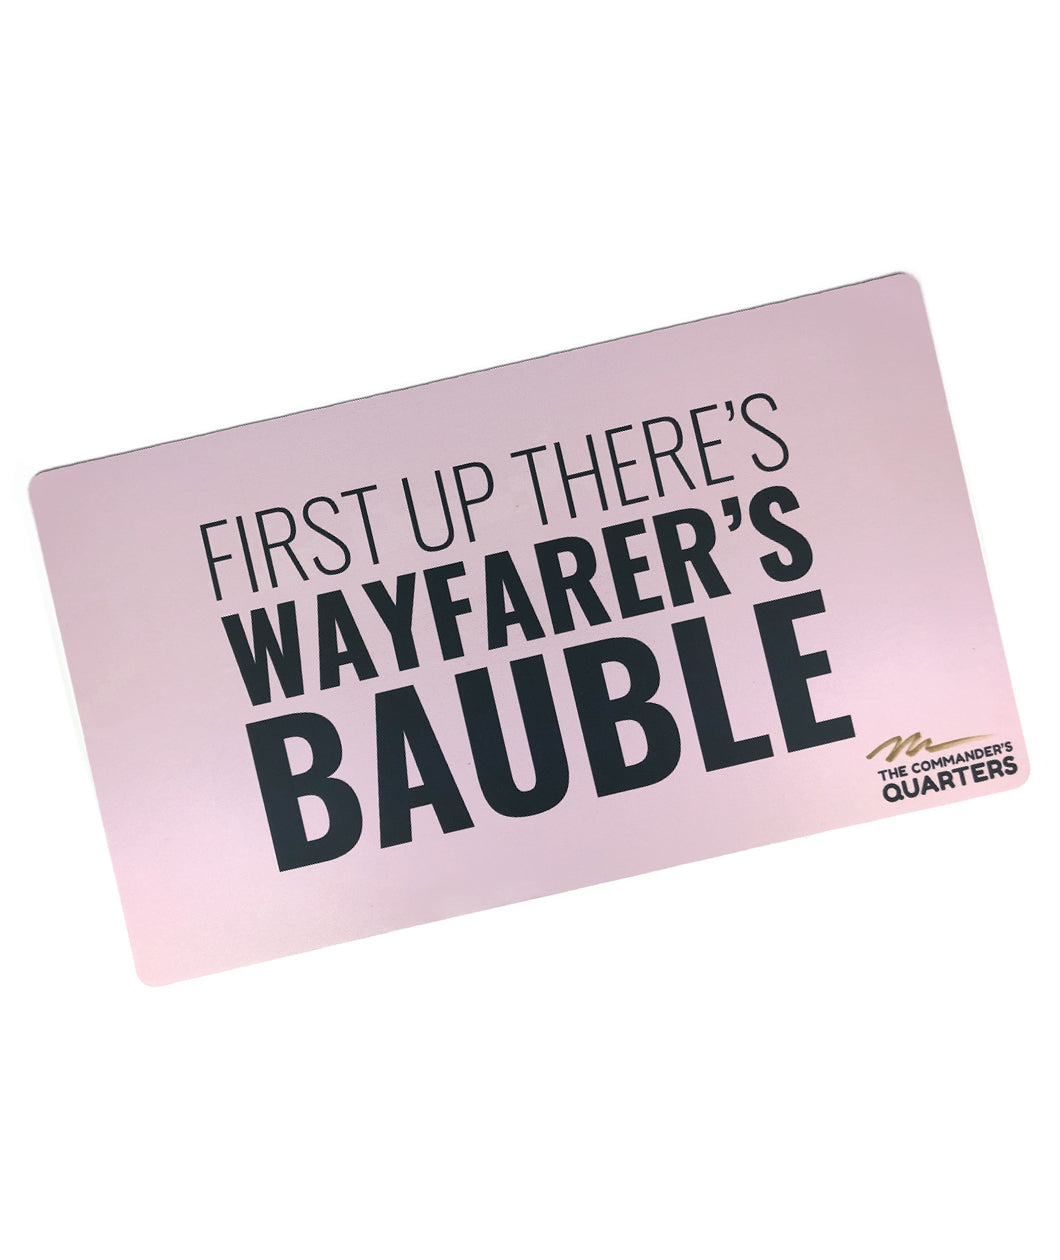 A pink rectangular playmat with curved edges. “First Up There’s Wayfarer’s Bauble” is in black sans serif font in varying weights in the center. “The Commander’s Quarter’s” is in the bottom right of the playmat with a signature above - from the Commander’s Quarters